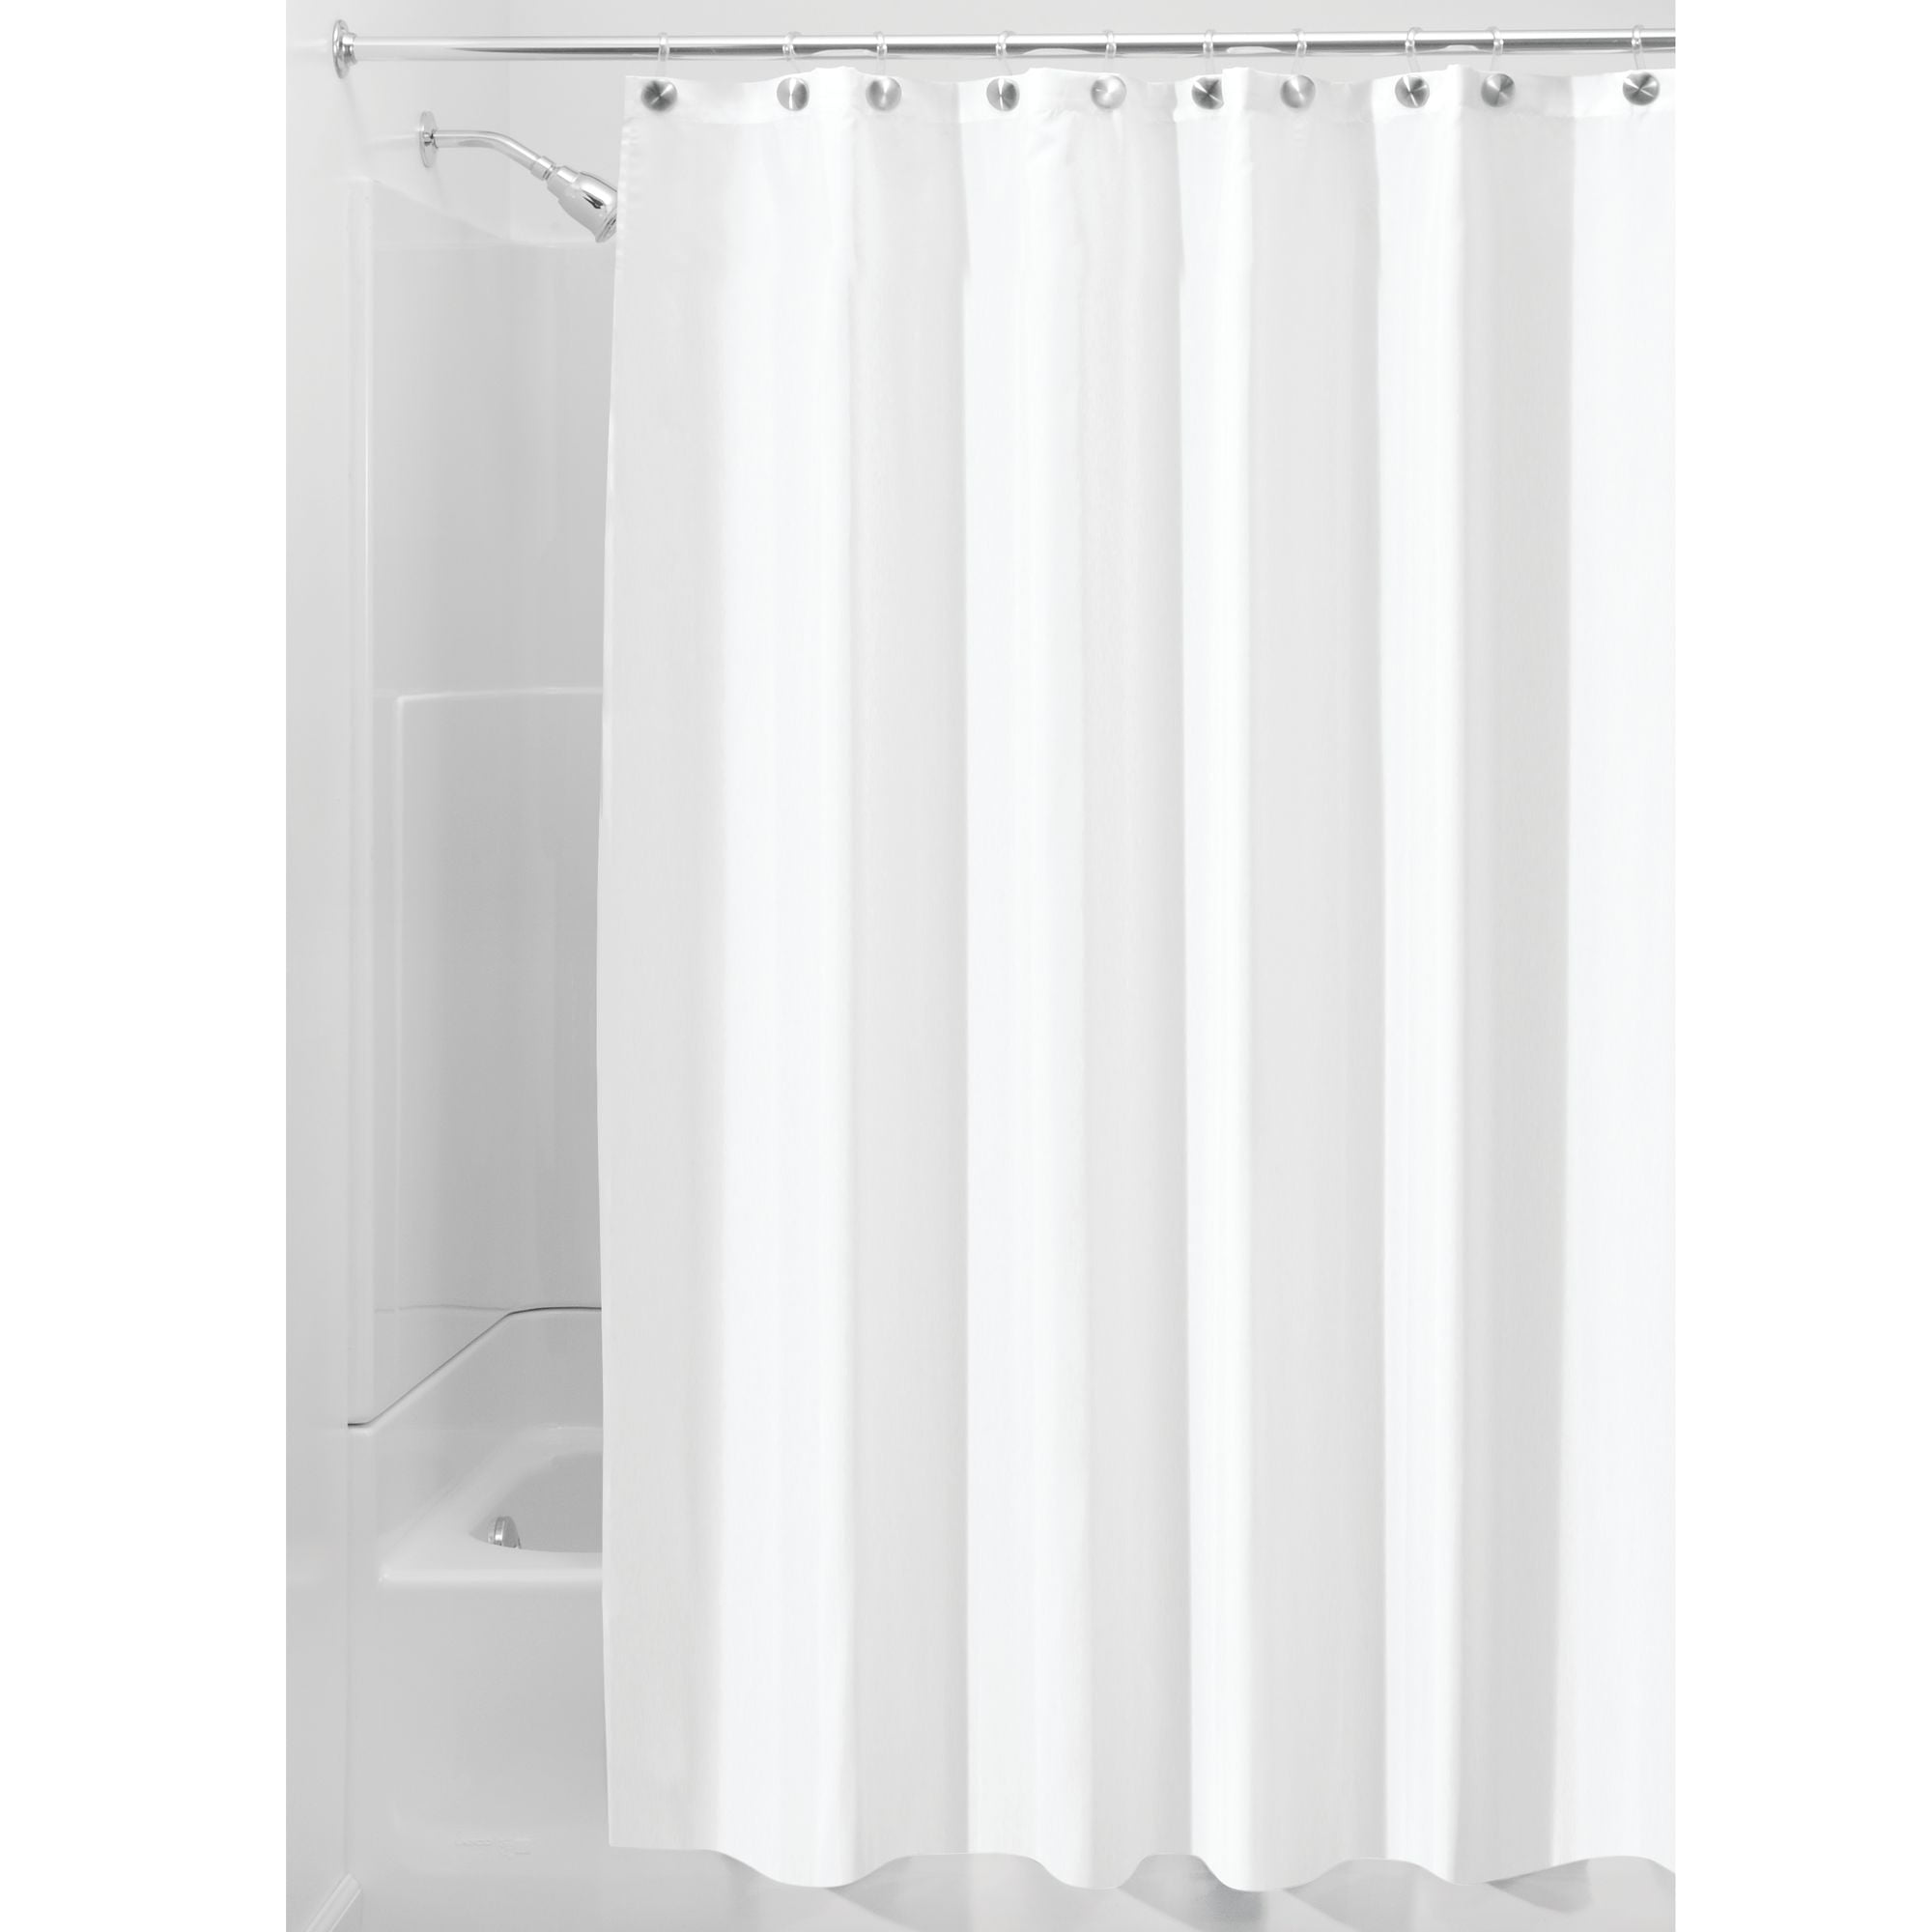 Interdesign Waterproof Fabric Shower, Extra Long And Wide Fabric Shower Curtains